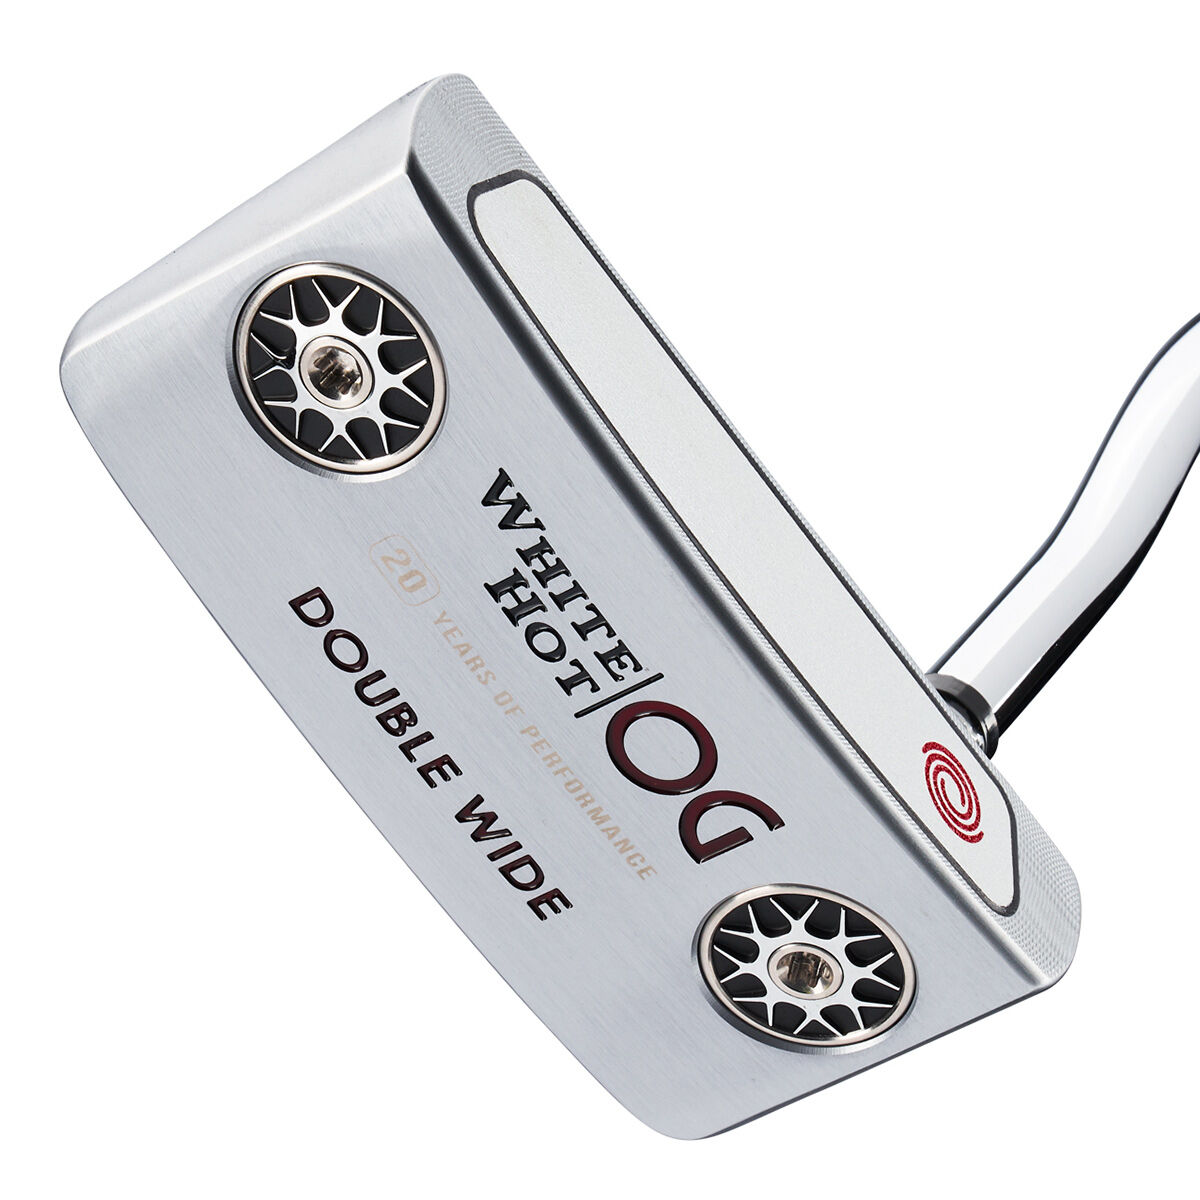 Odyssey White Hot OG Stroke Lab Double Wide DB Golf Putter, Mens, Right hand, 34 inches | American Golf von Odyssey